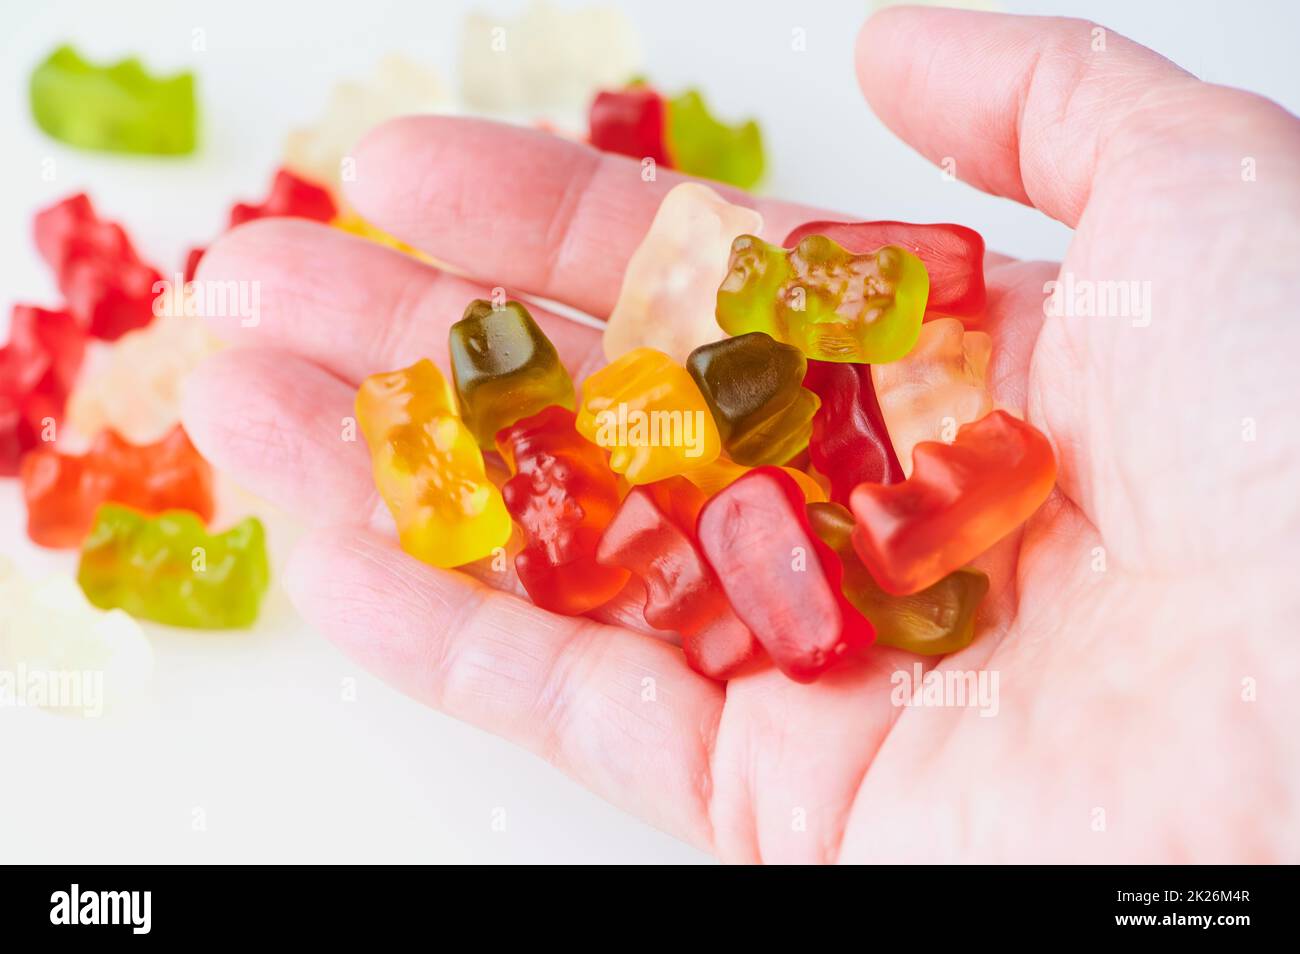 colored gummy bears in an open hand Stock Photo